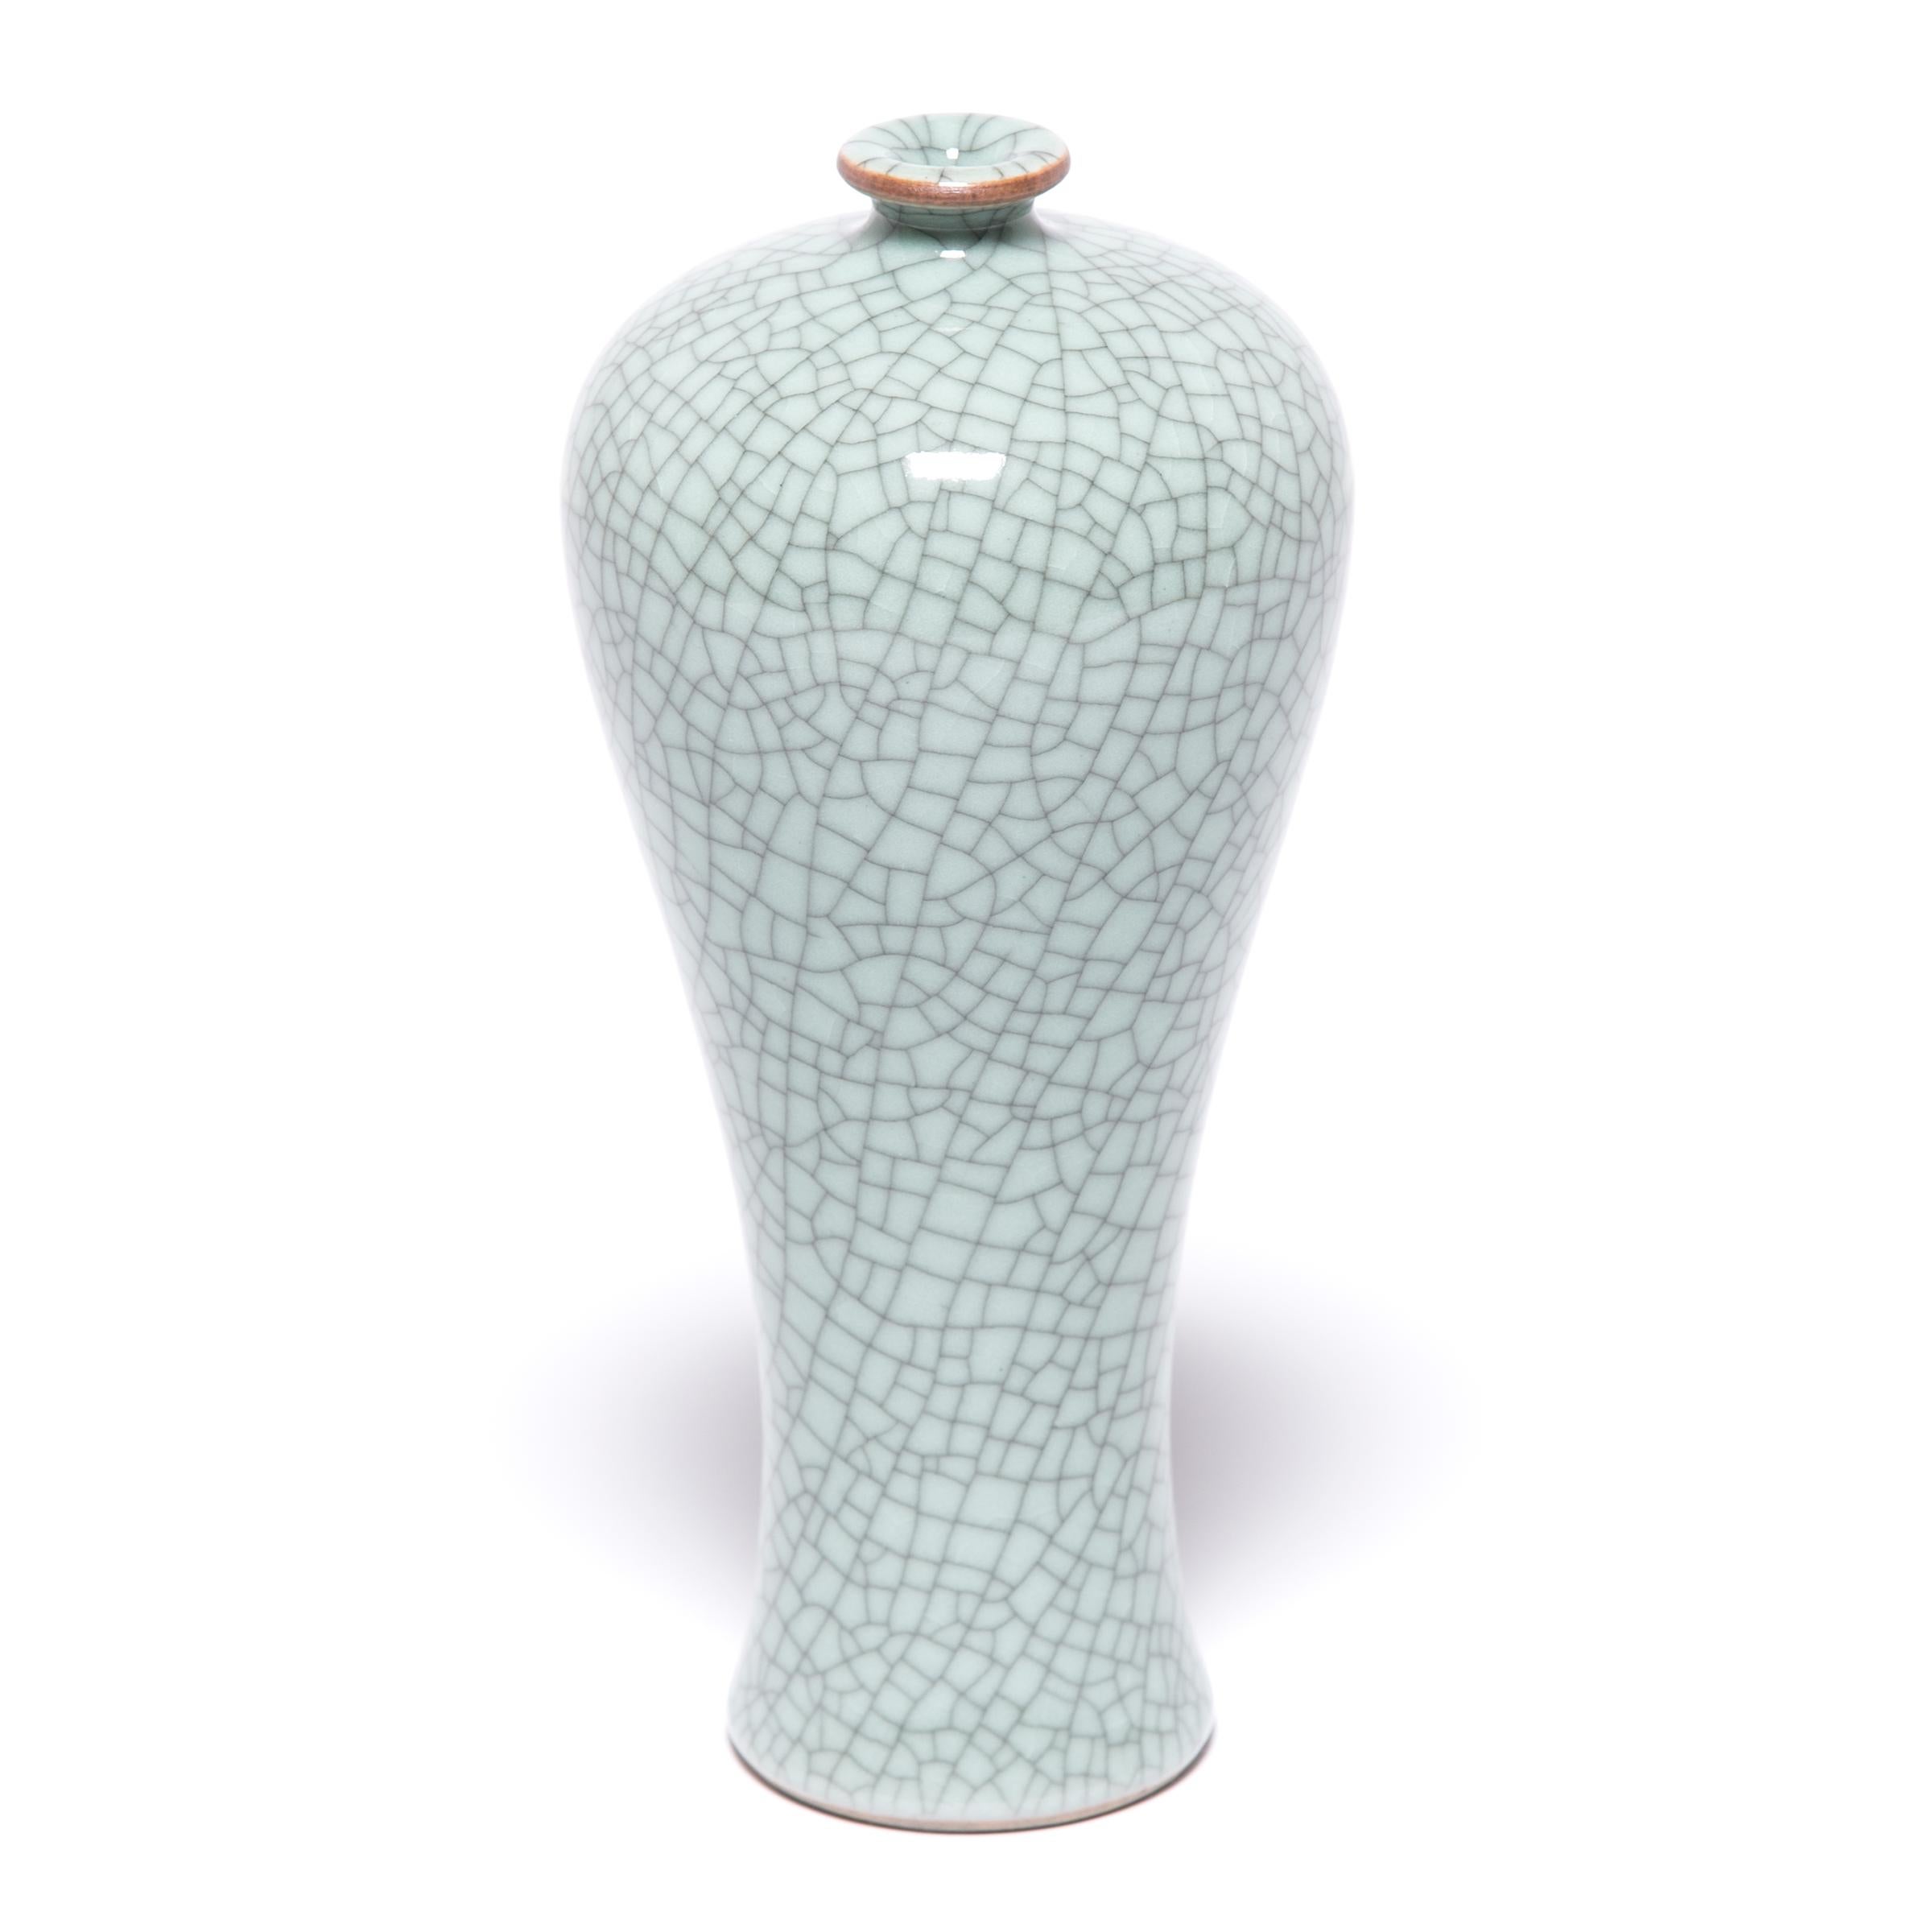 This contemporary vase hearkens to the Classic meiping form, traditionally used to display flowering plum branches. Contemporary artisans in Zhejiang beautifully recreate the distinctive crackle glaze of traditional Guan and Ge ware, allowing the